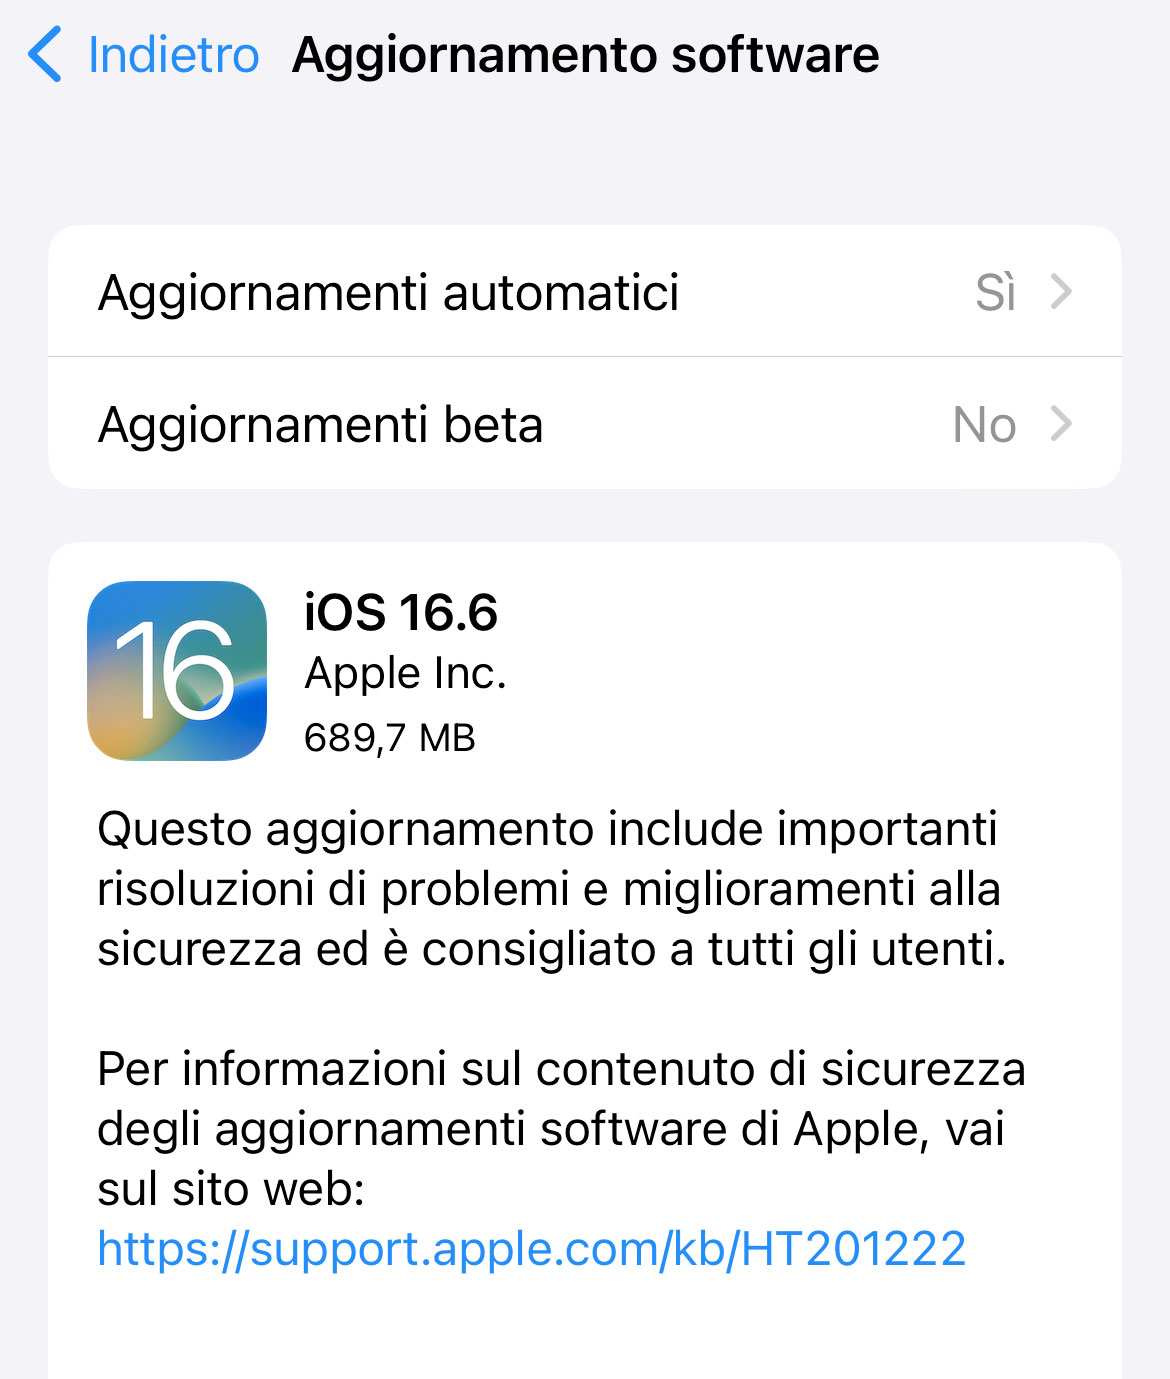 iOS 16.6 and iPadOS 16.6 updates are available